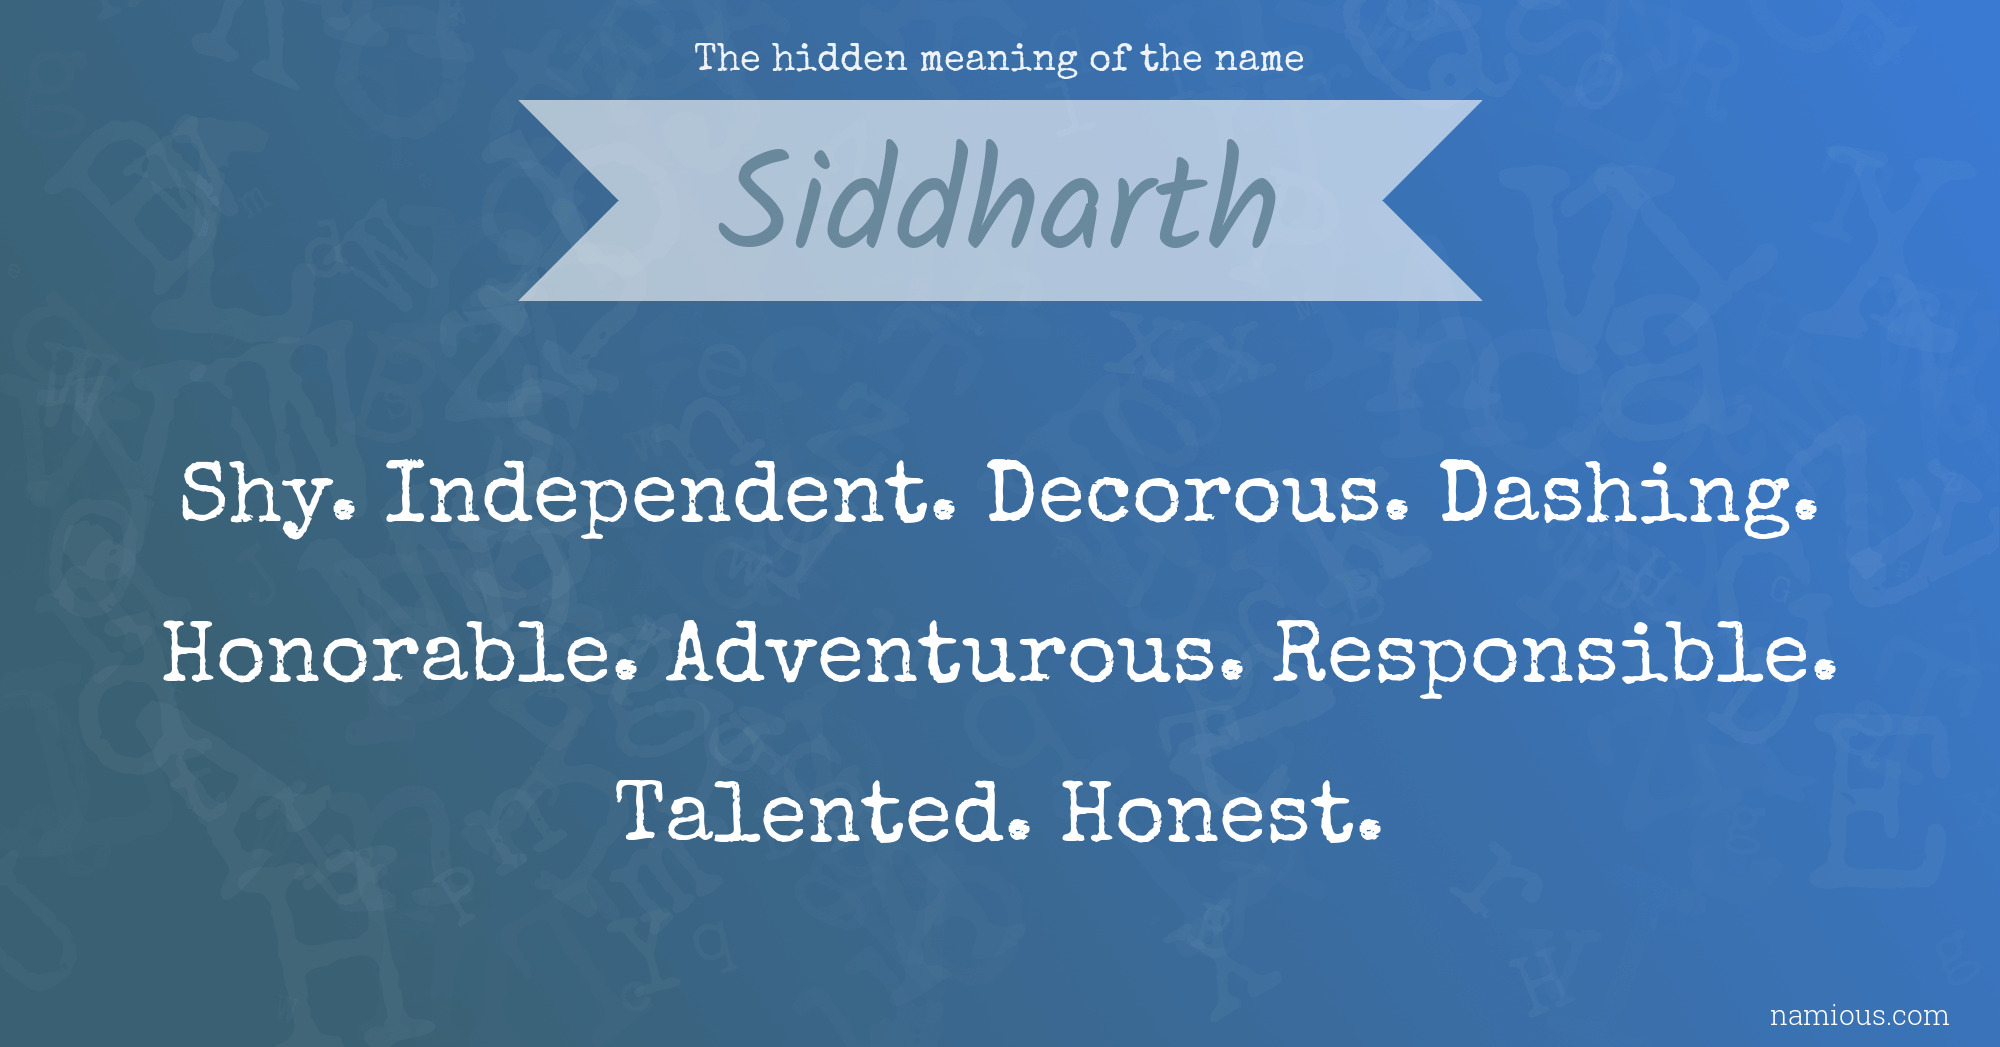 The Hidden Meaning Of The Name Siddharth Namious Siddharth is a variant of the indian boy's name, siddhartha, which means 'one who has achieved all. the hidden meaning of the name